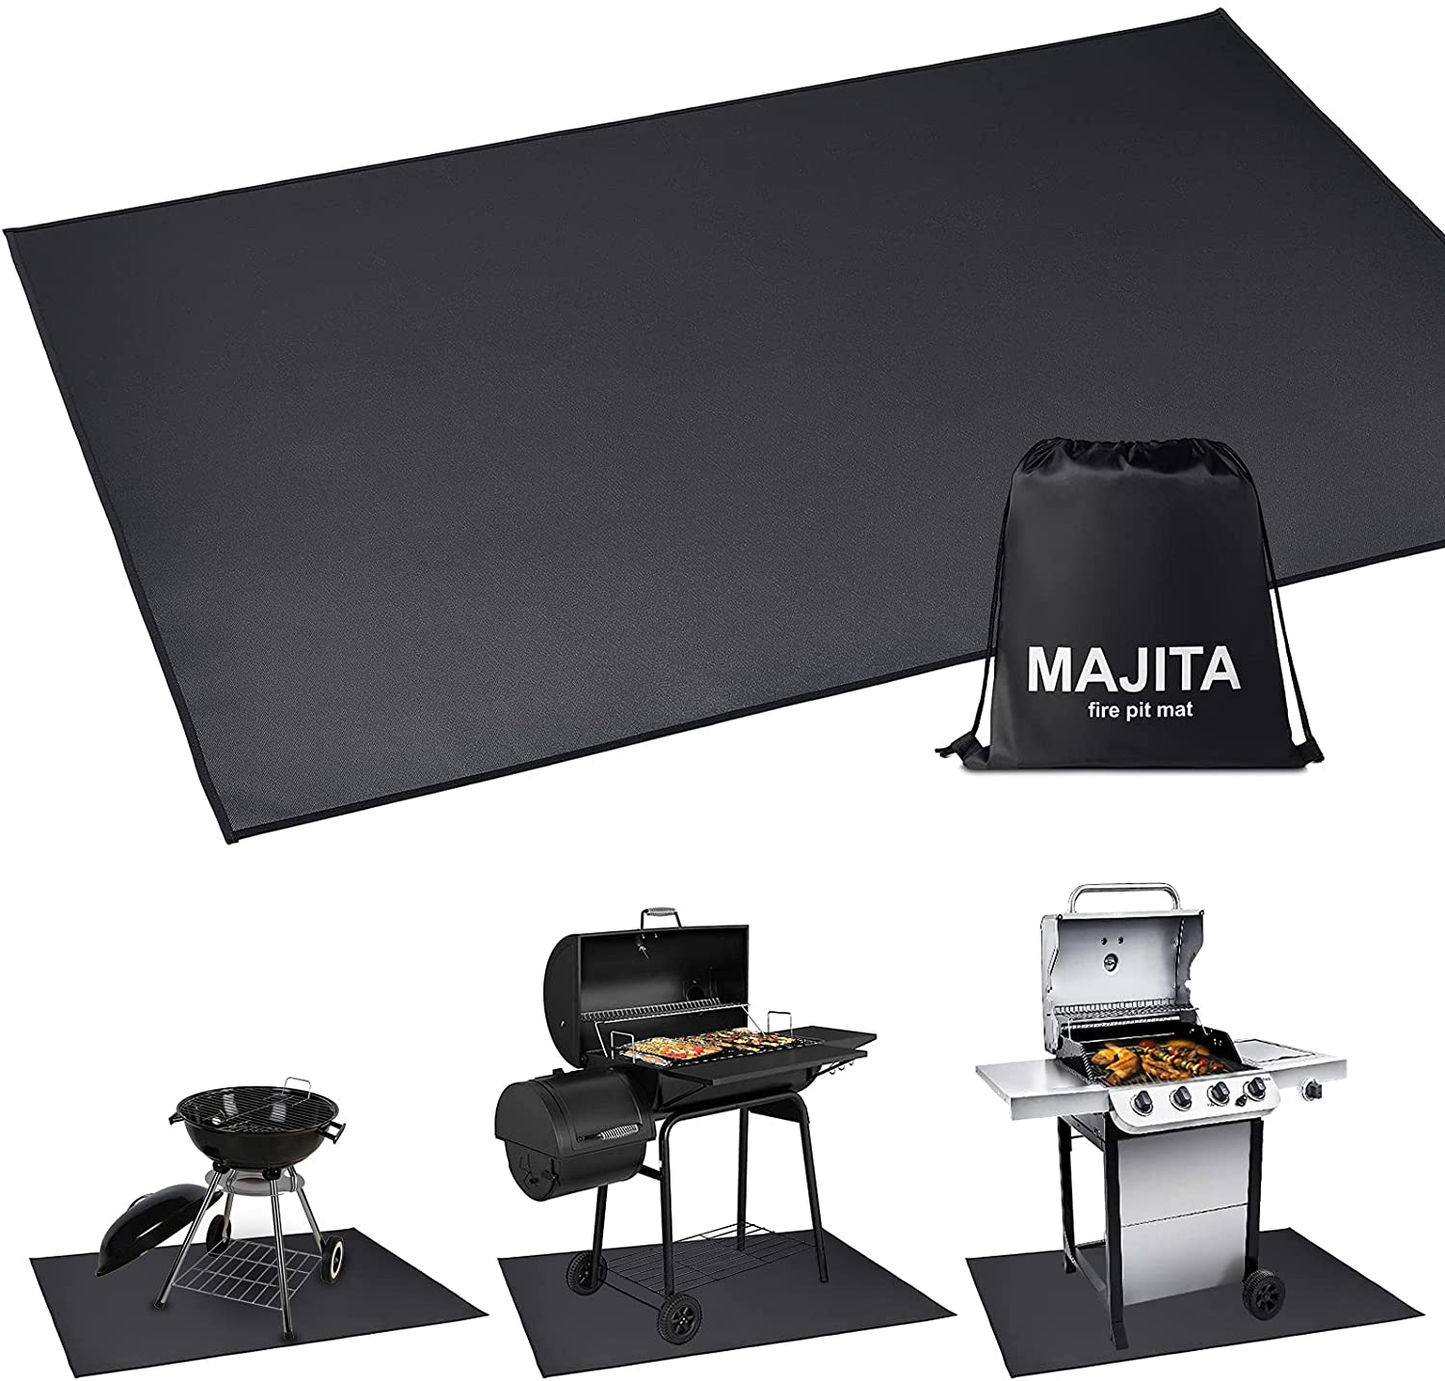 MAJITA Under Grill Mat 42 ×30 Inch for Outdoor Charcoal, Flat Top, Smokers, Gas Grills.Oil-Proof and Water-Proof BBQ Fireproof Mat Protects Deck Grass, Indoor Fireplace Mat Fire Pit Mat